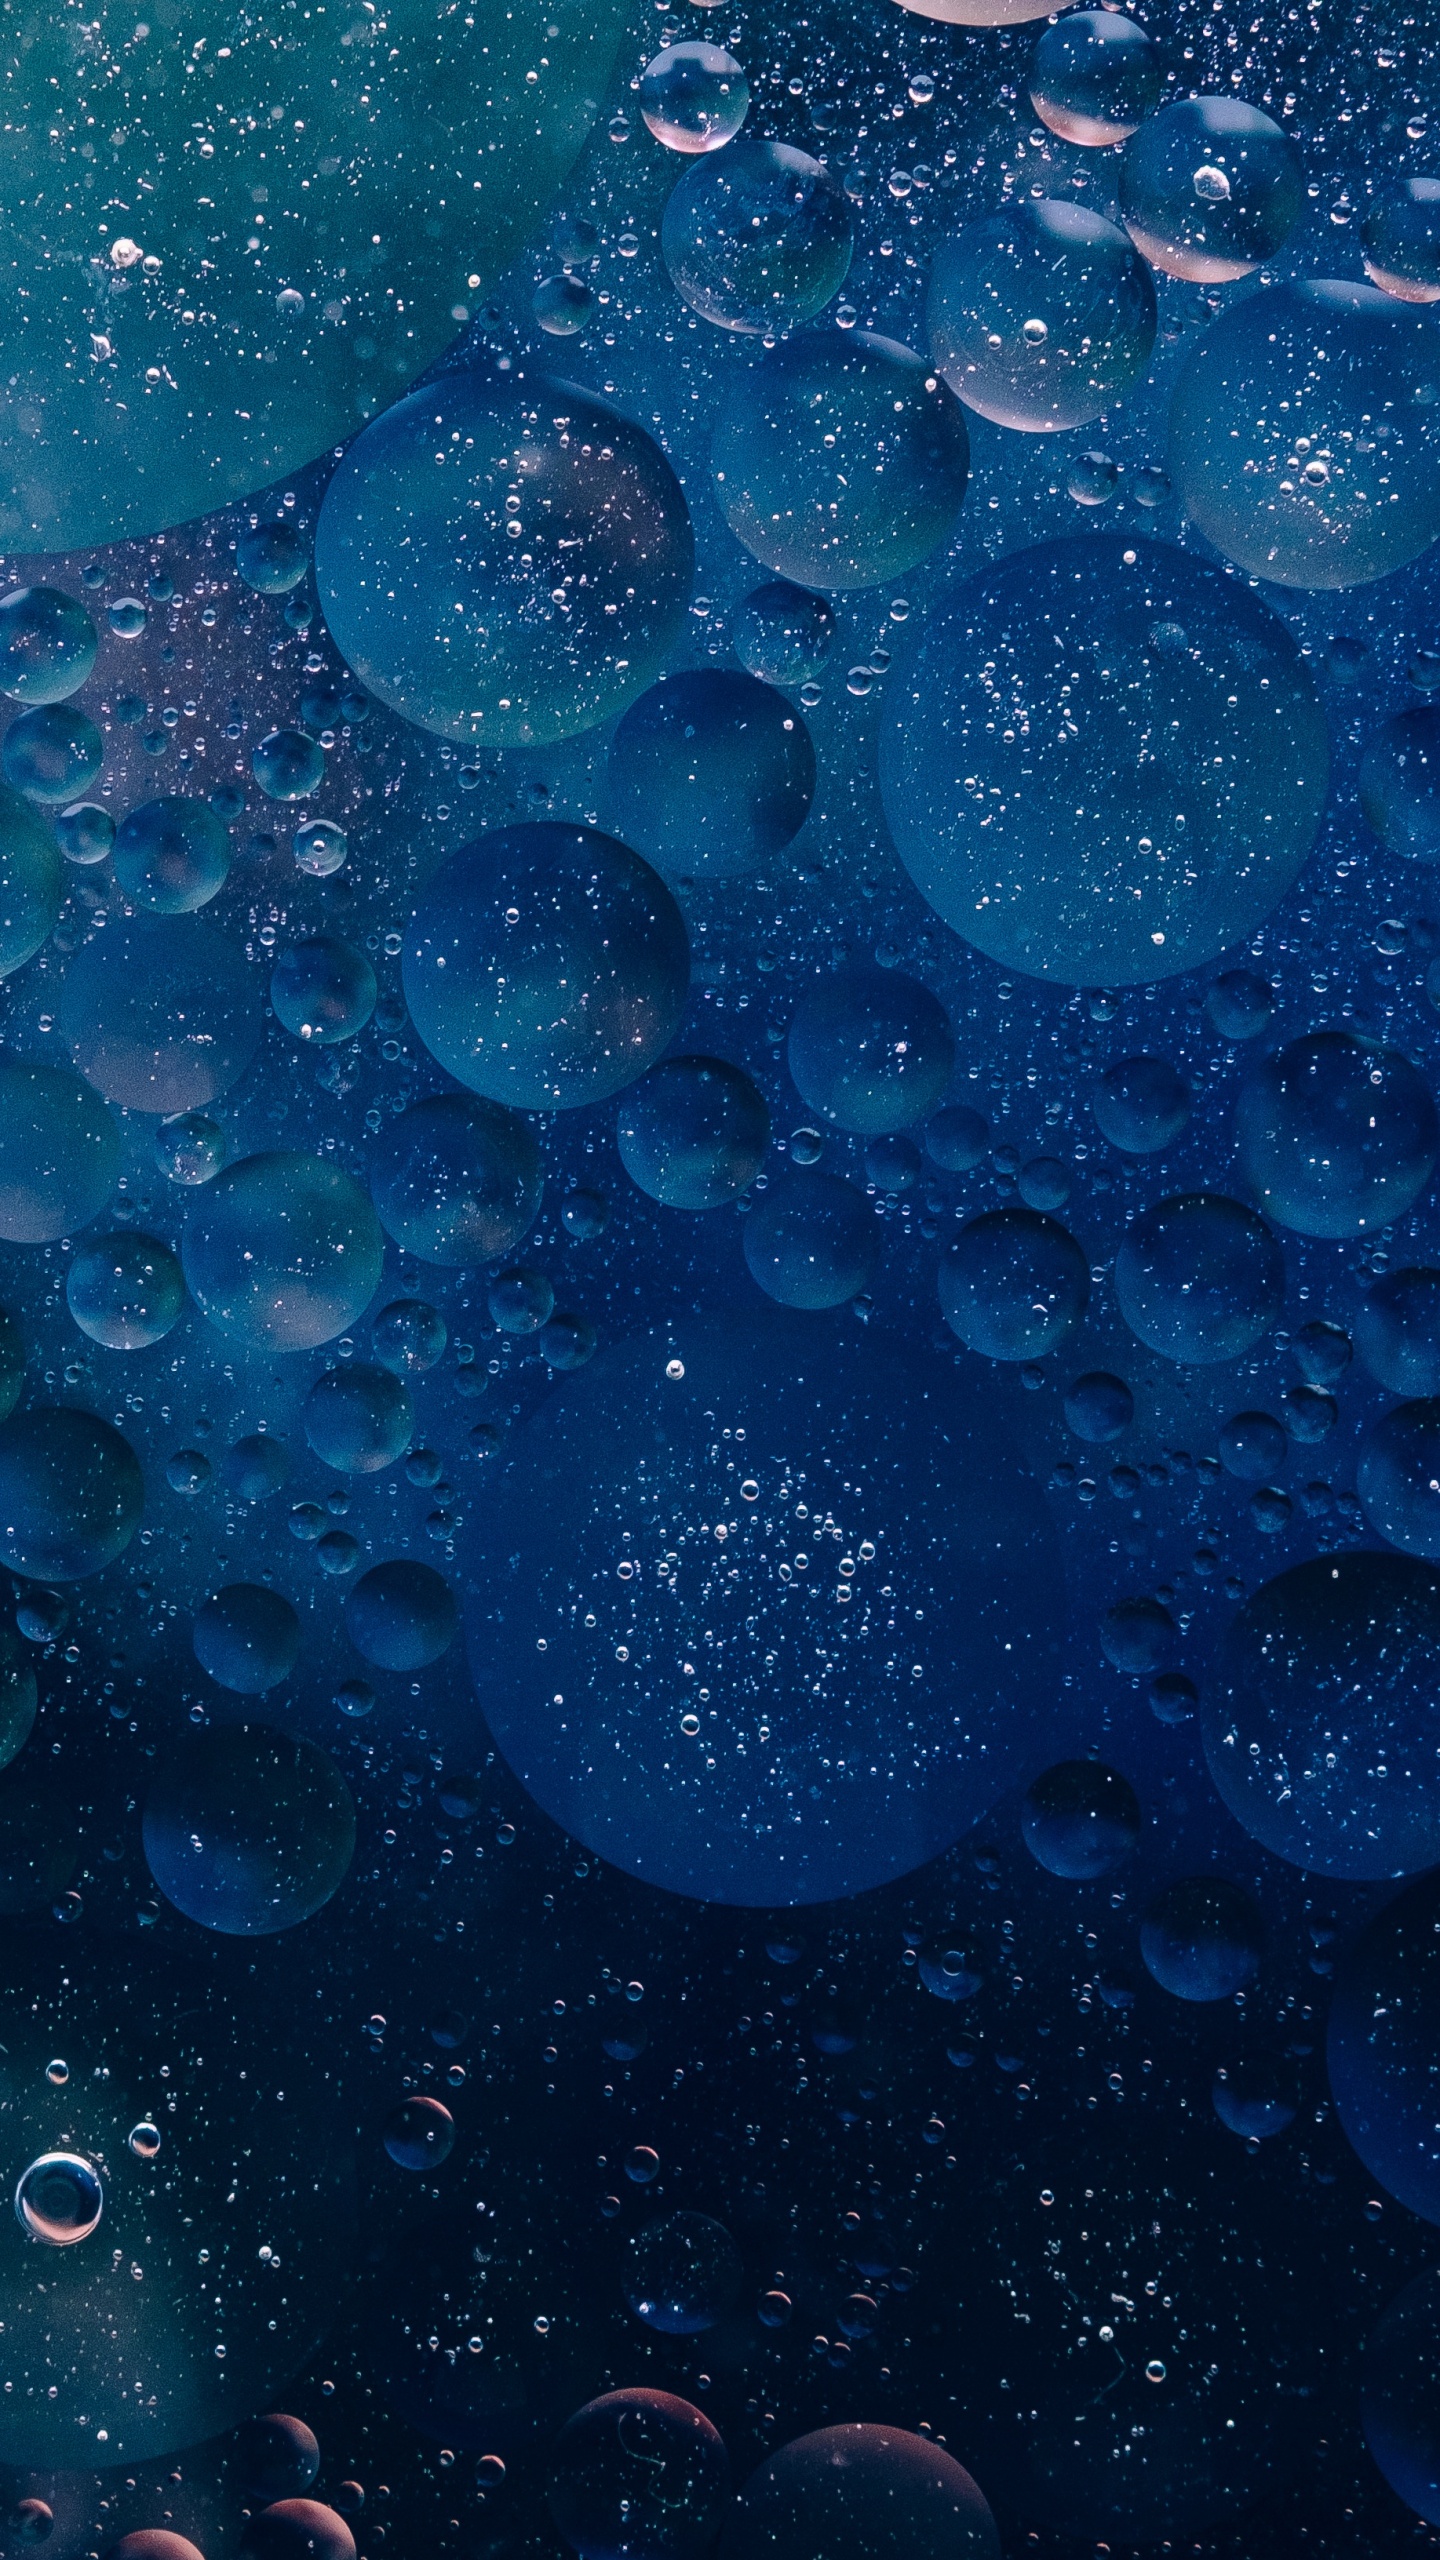 Water Droplets on Glass Panel. Wallpaper in 1440x2560 Resolution